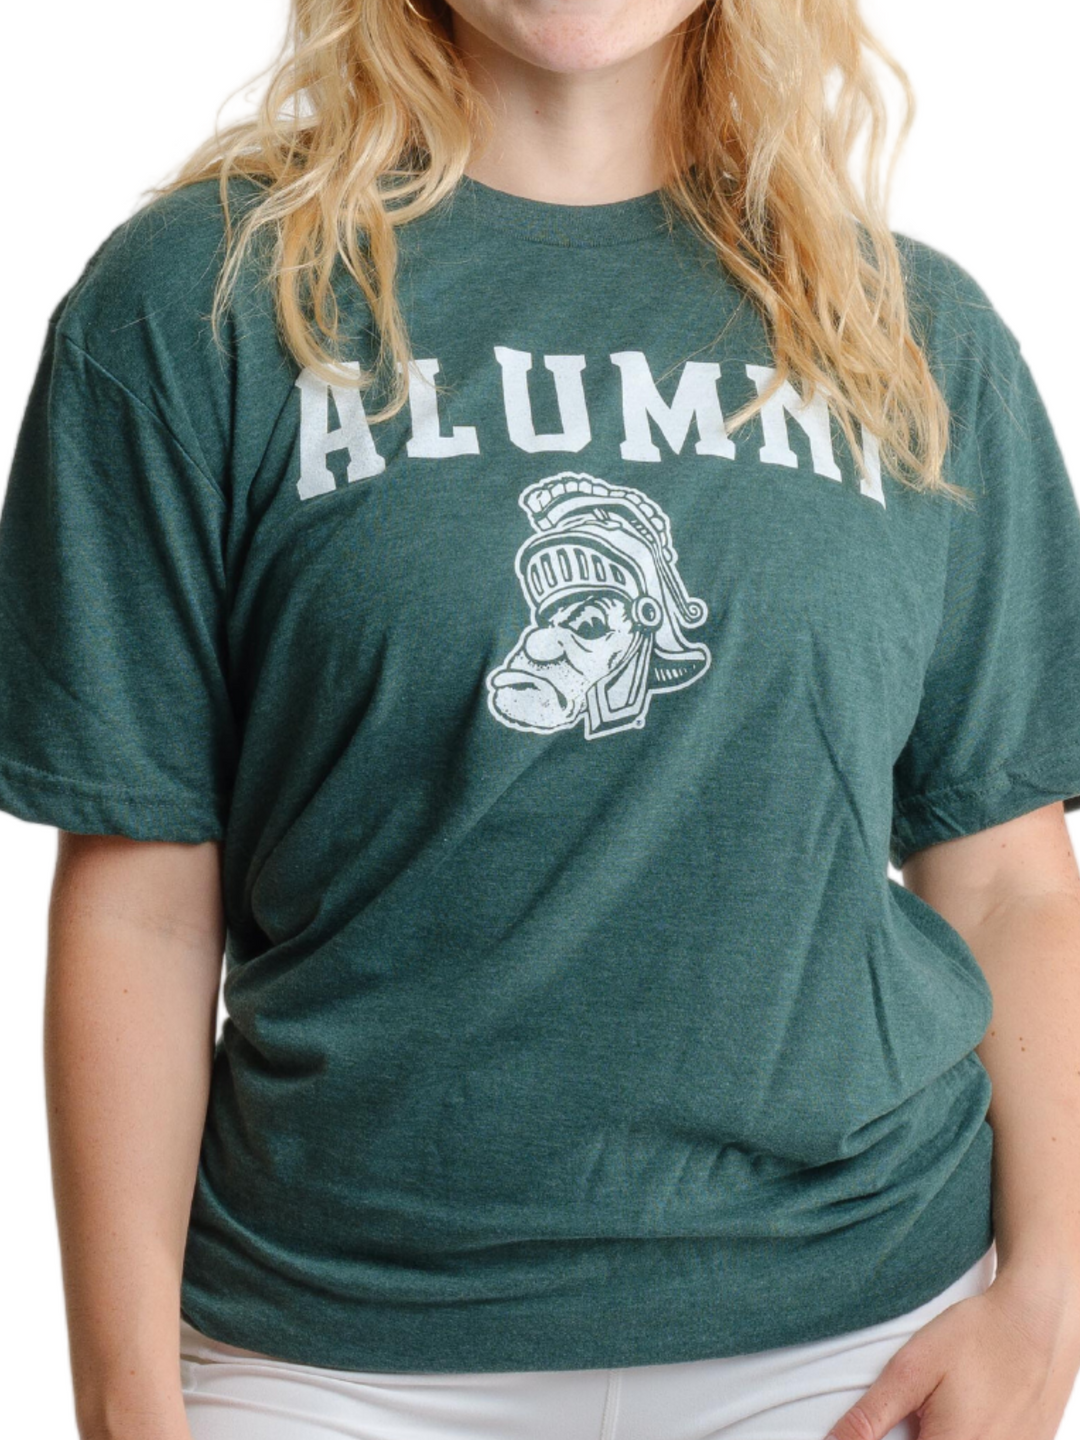 Michigan State T Shirt with Alumni Gruff Sparty on female